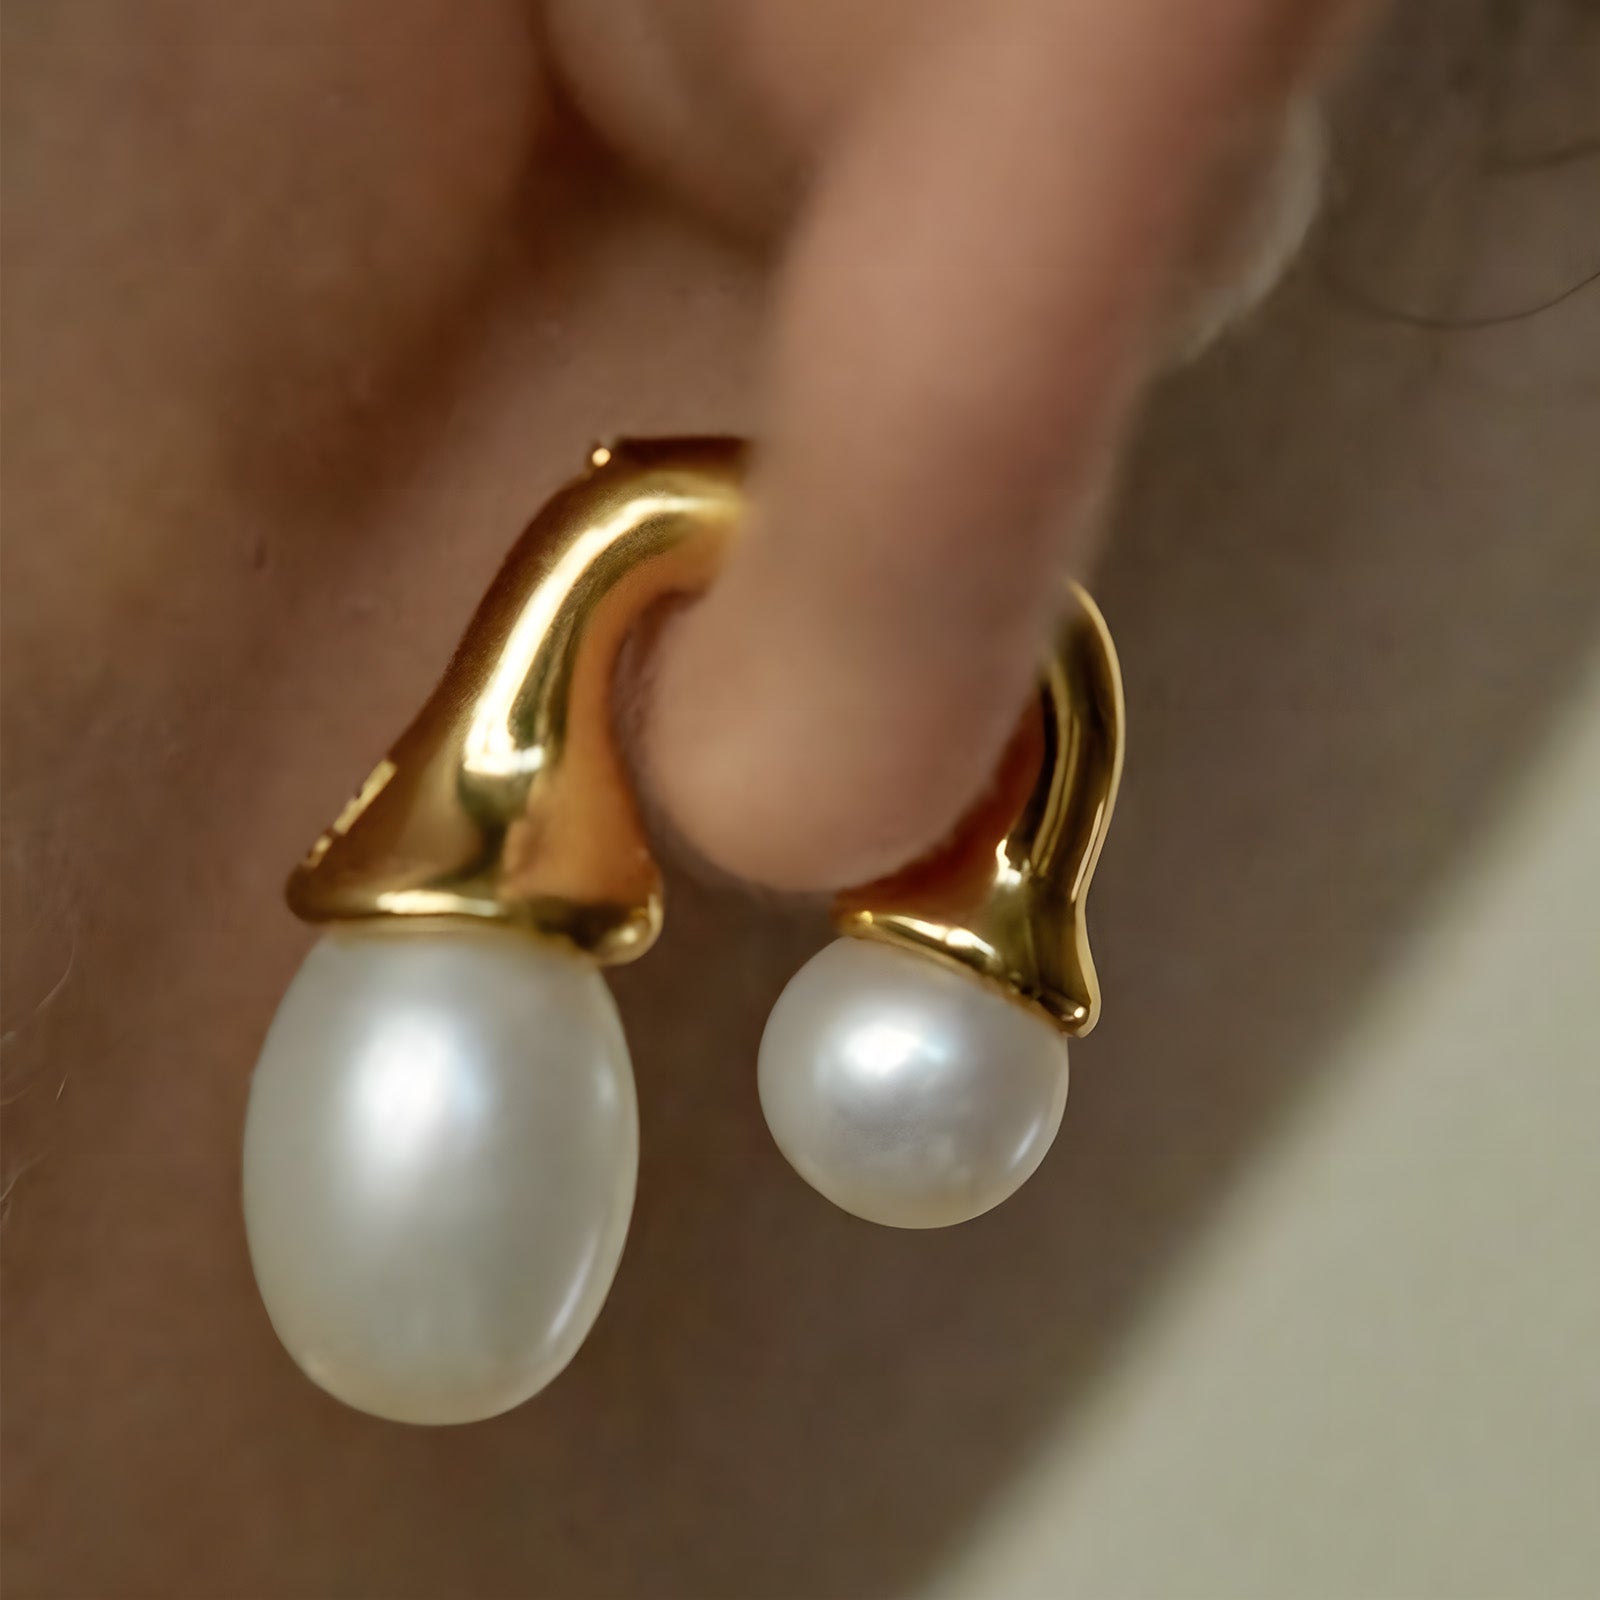 Gold Earrings adorned with two pearls, a chic and stylish choice for adding a touch of sophistication to your ensemble